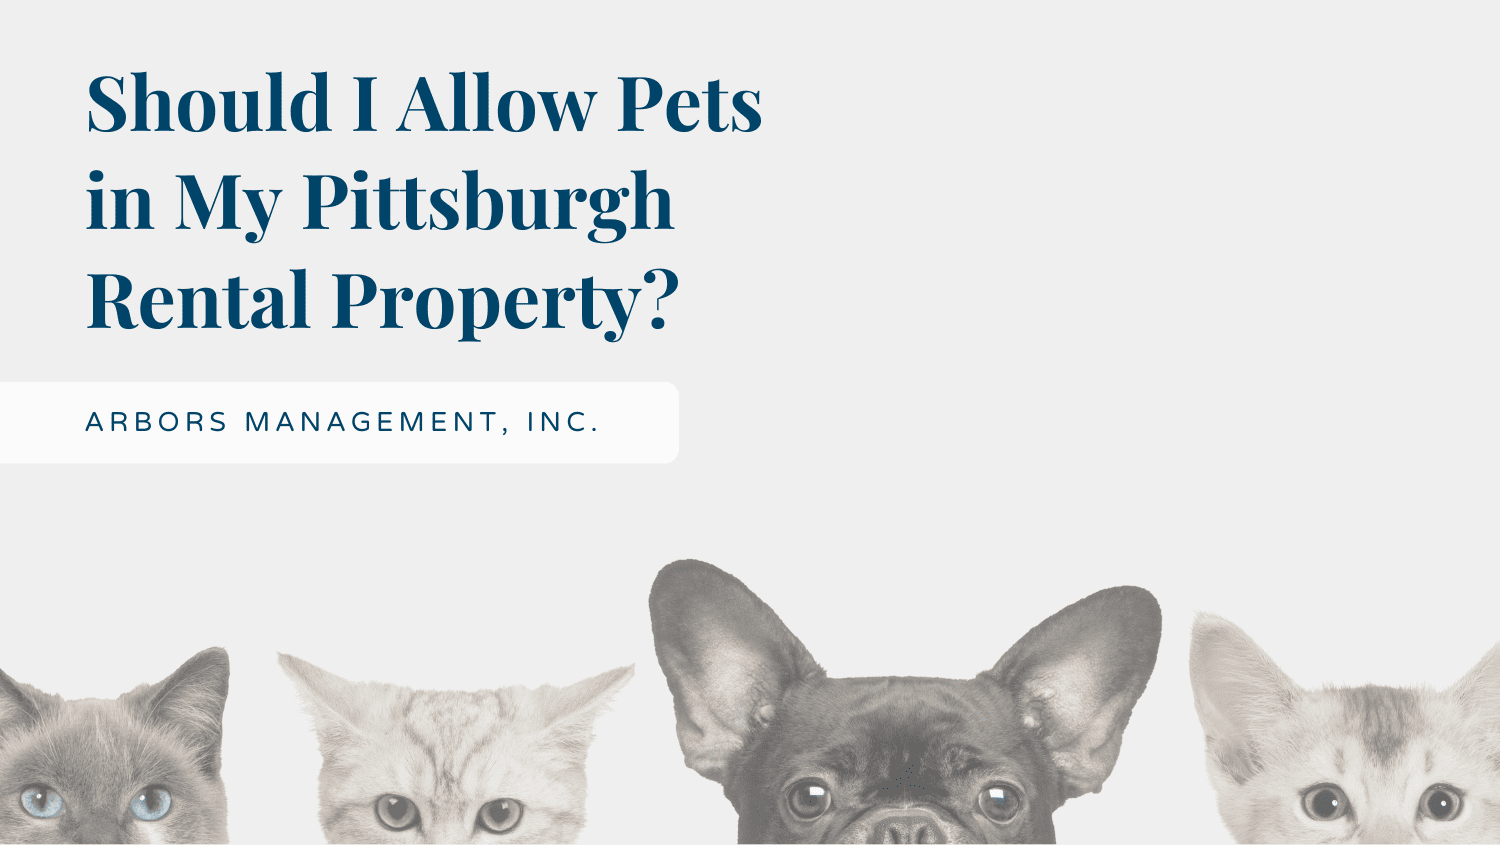 Image is of the title of the blog post "Should I Allow Pets in My Pittsburgh Rental Property?" Image has the faces of three cats and one dog.